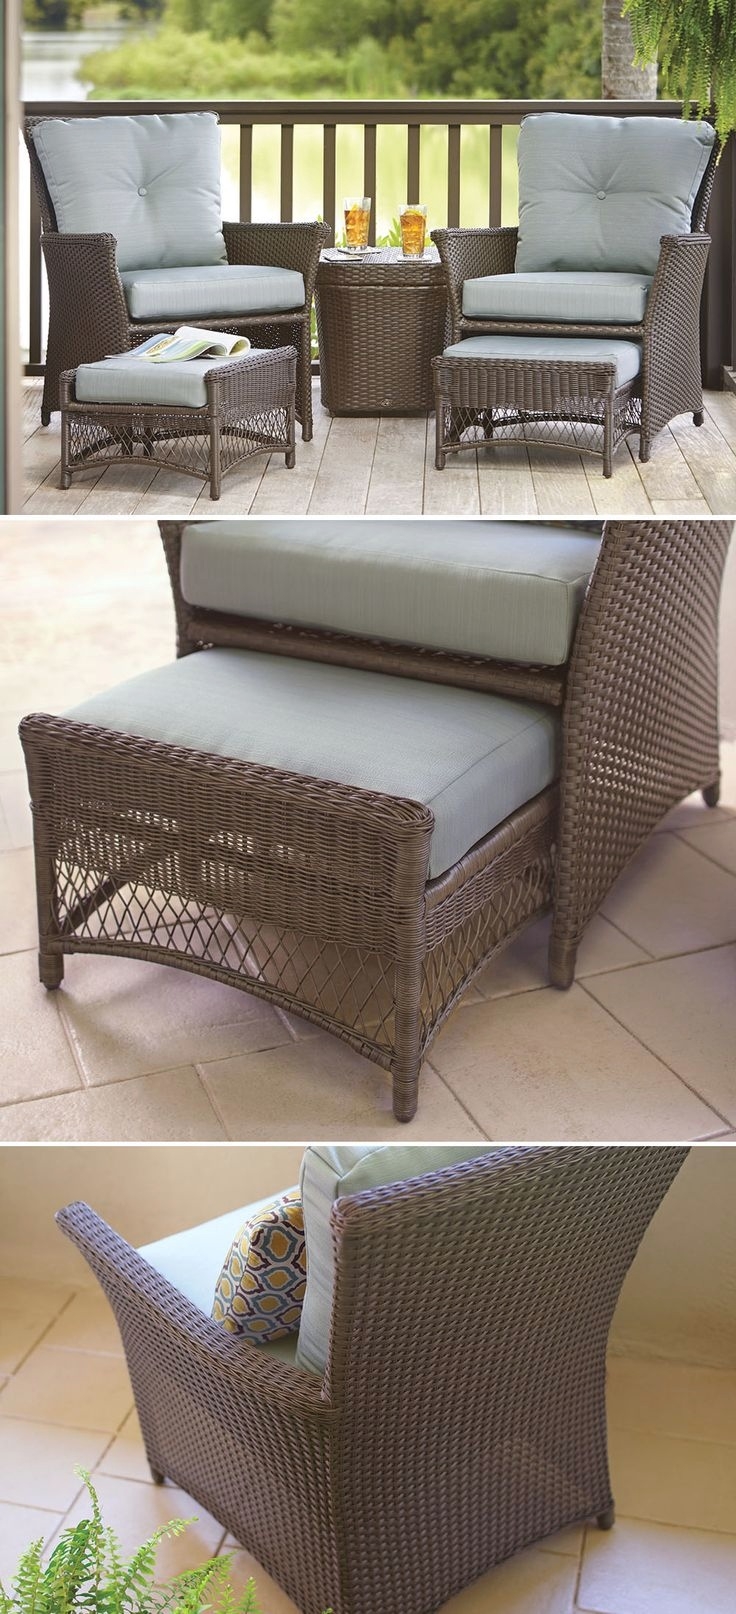 patio furniture for small spaces photo - 5